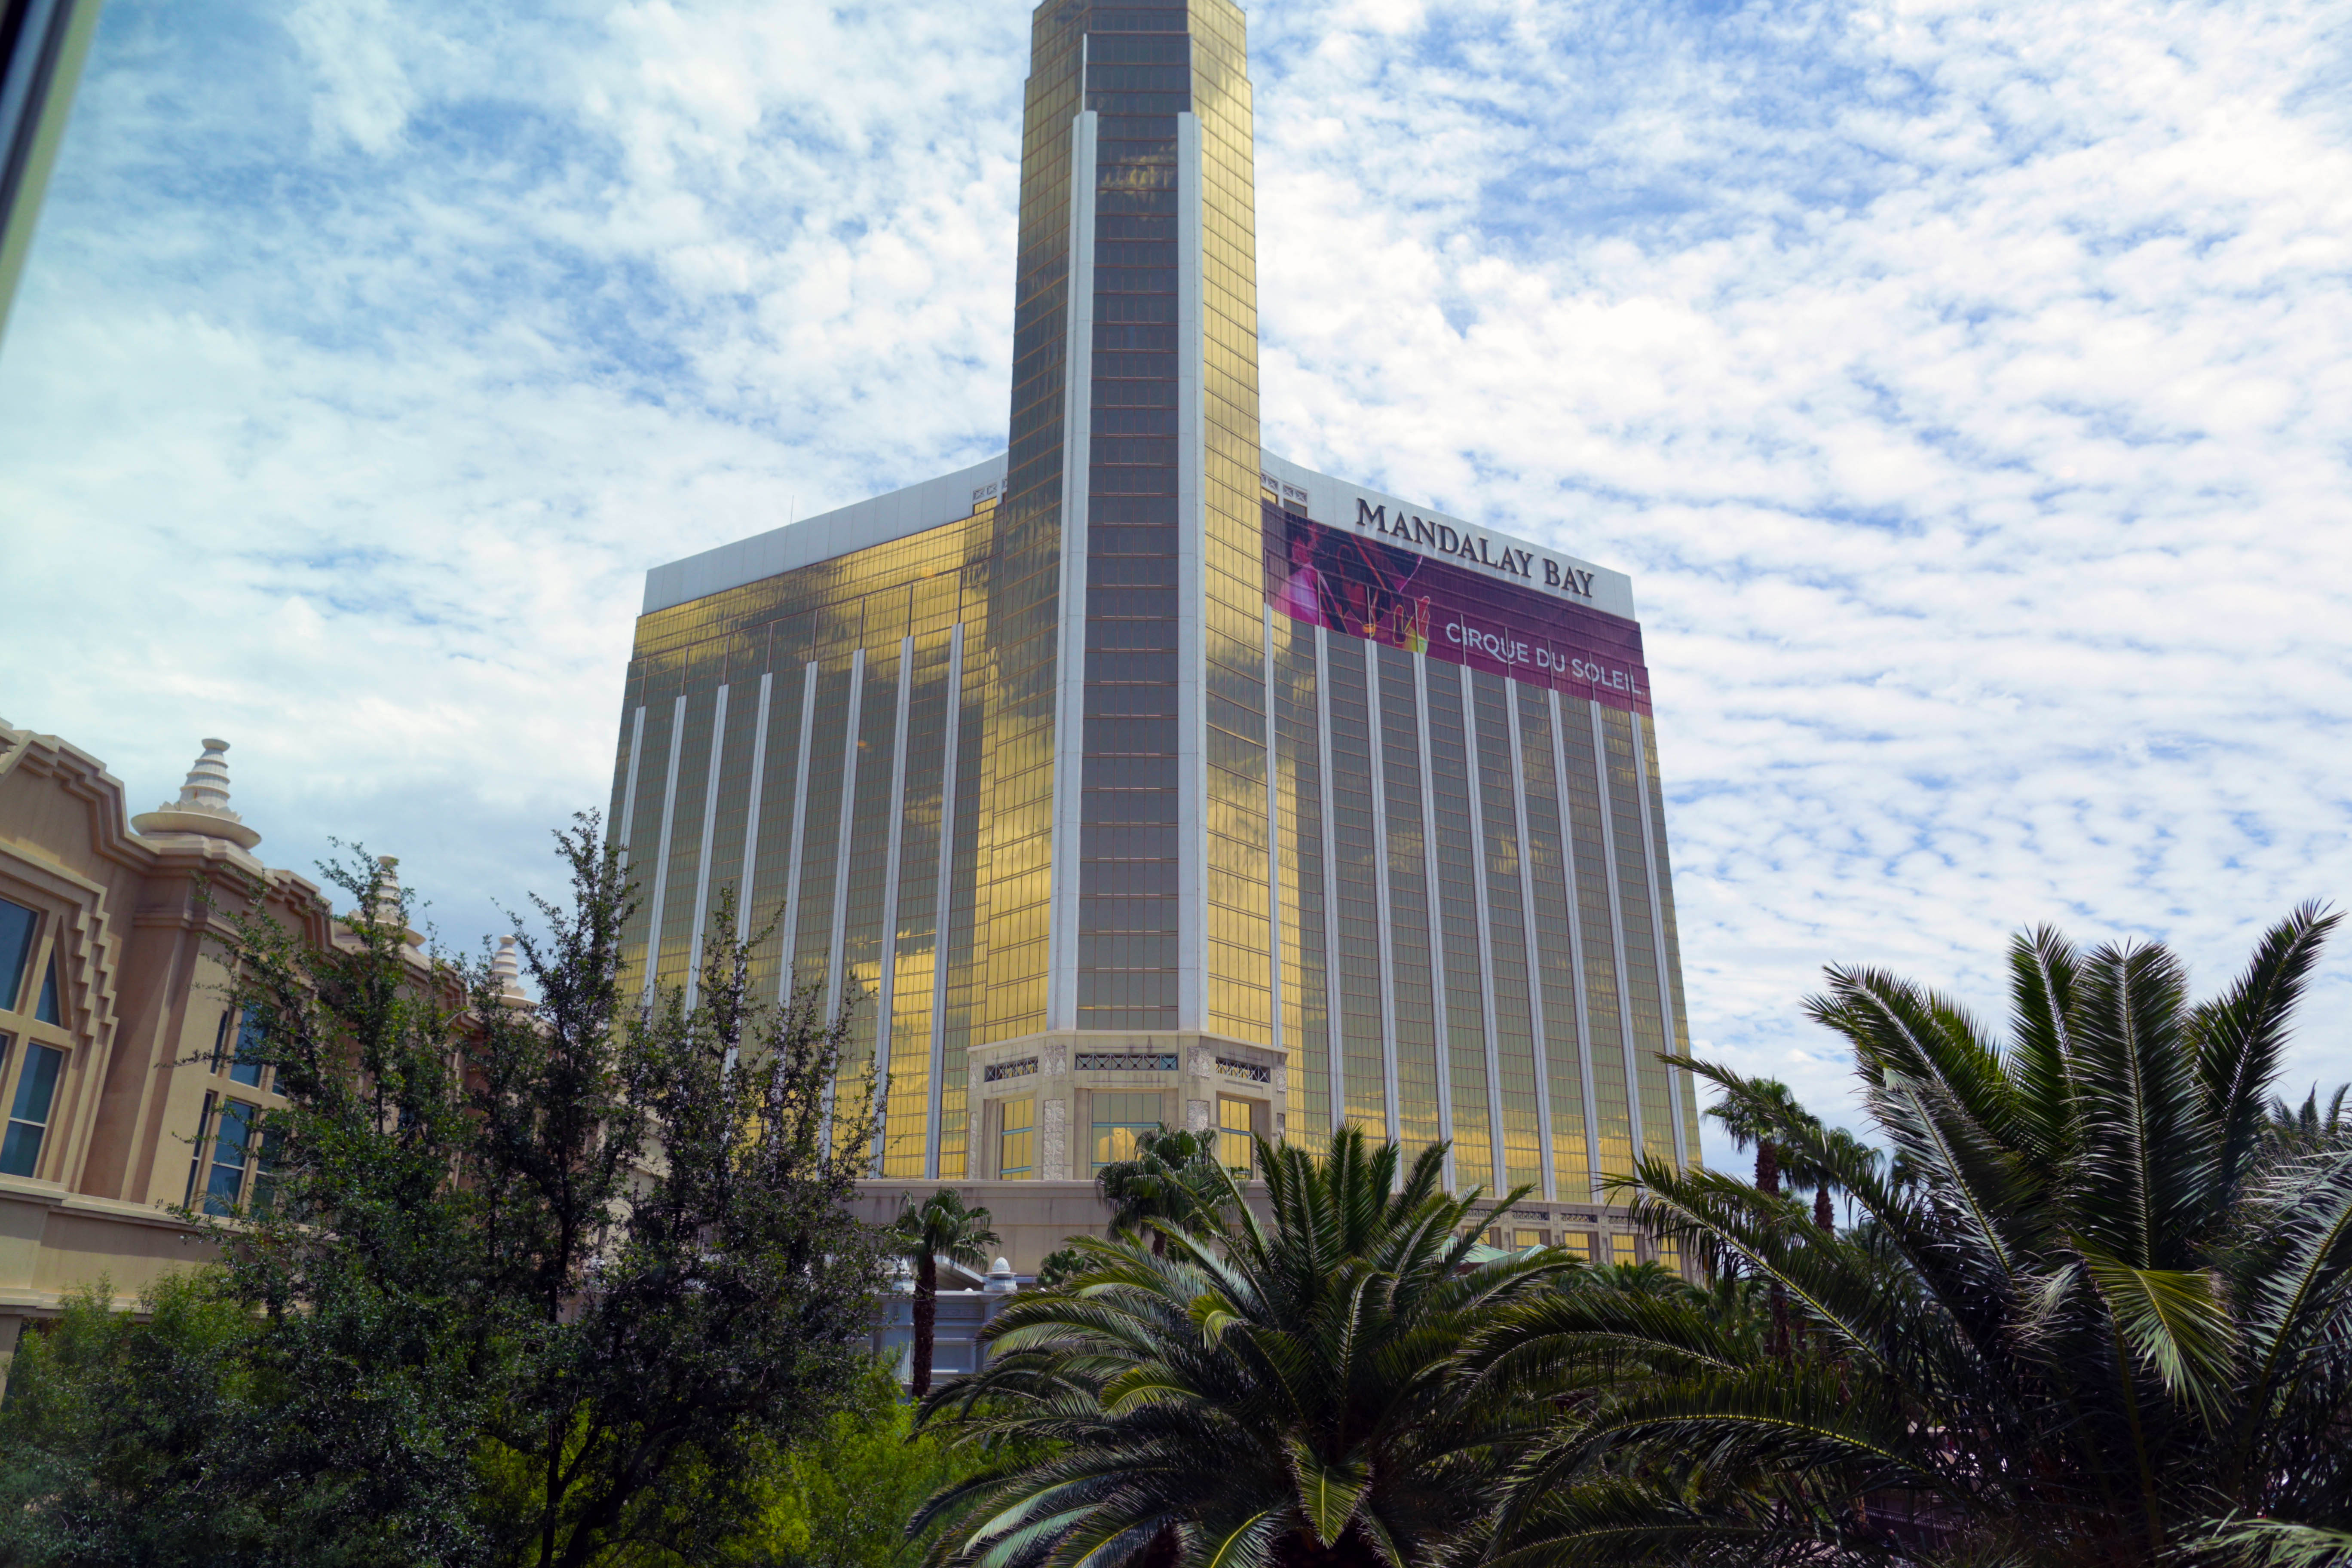 Mandalay Bay Hotel, Casino, and Conference Center in Las Vegas.